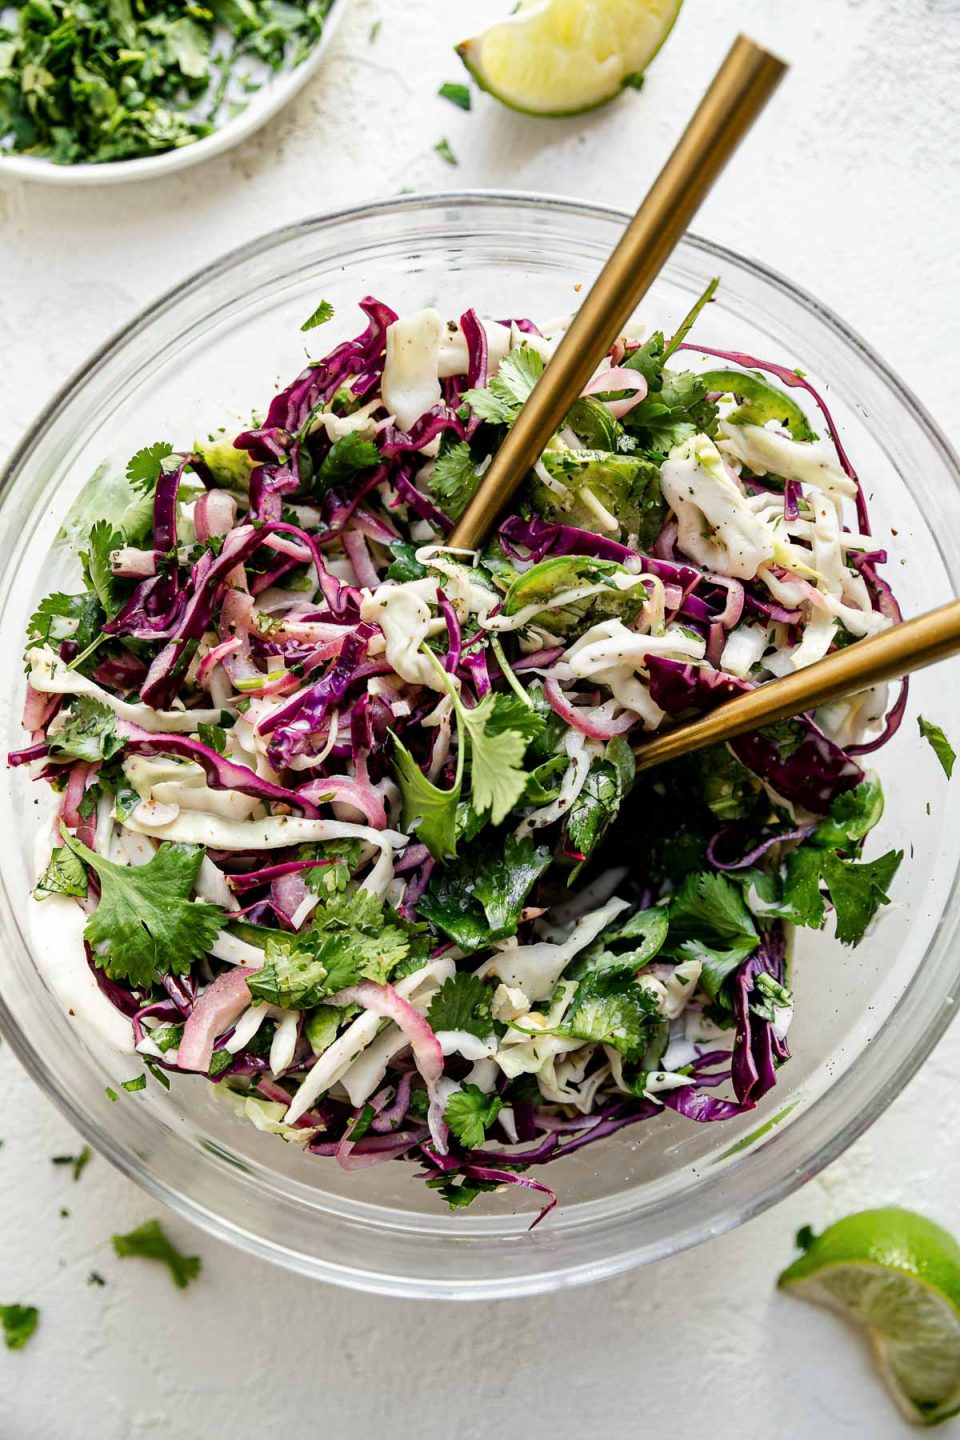 Easy slaw shown in a large glass mixing bowl atop a textured white surface with 2 gold forks inserted in it. Surrounding the bowl are chopped cilantro leaves, a small plate of chopped cilantro, & a spent lime wedge.